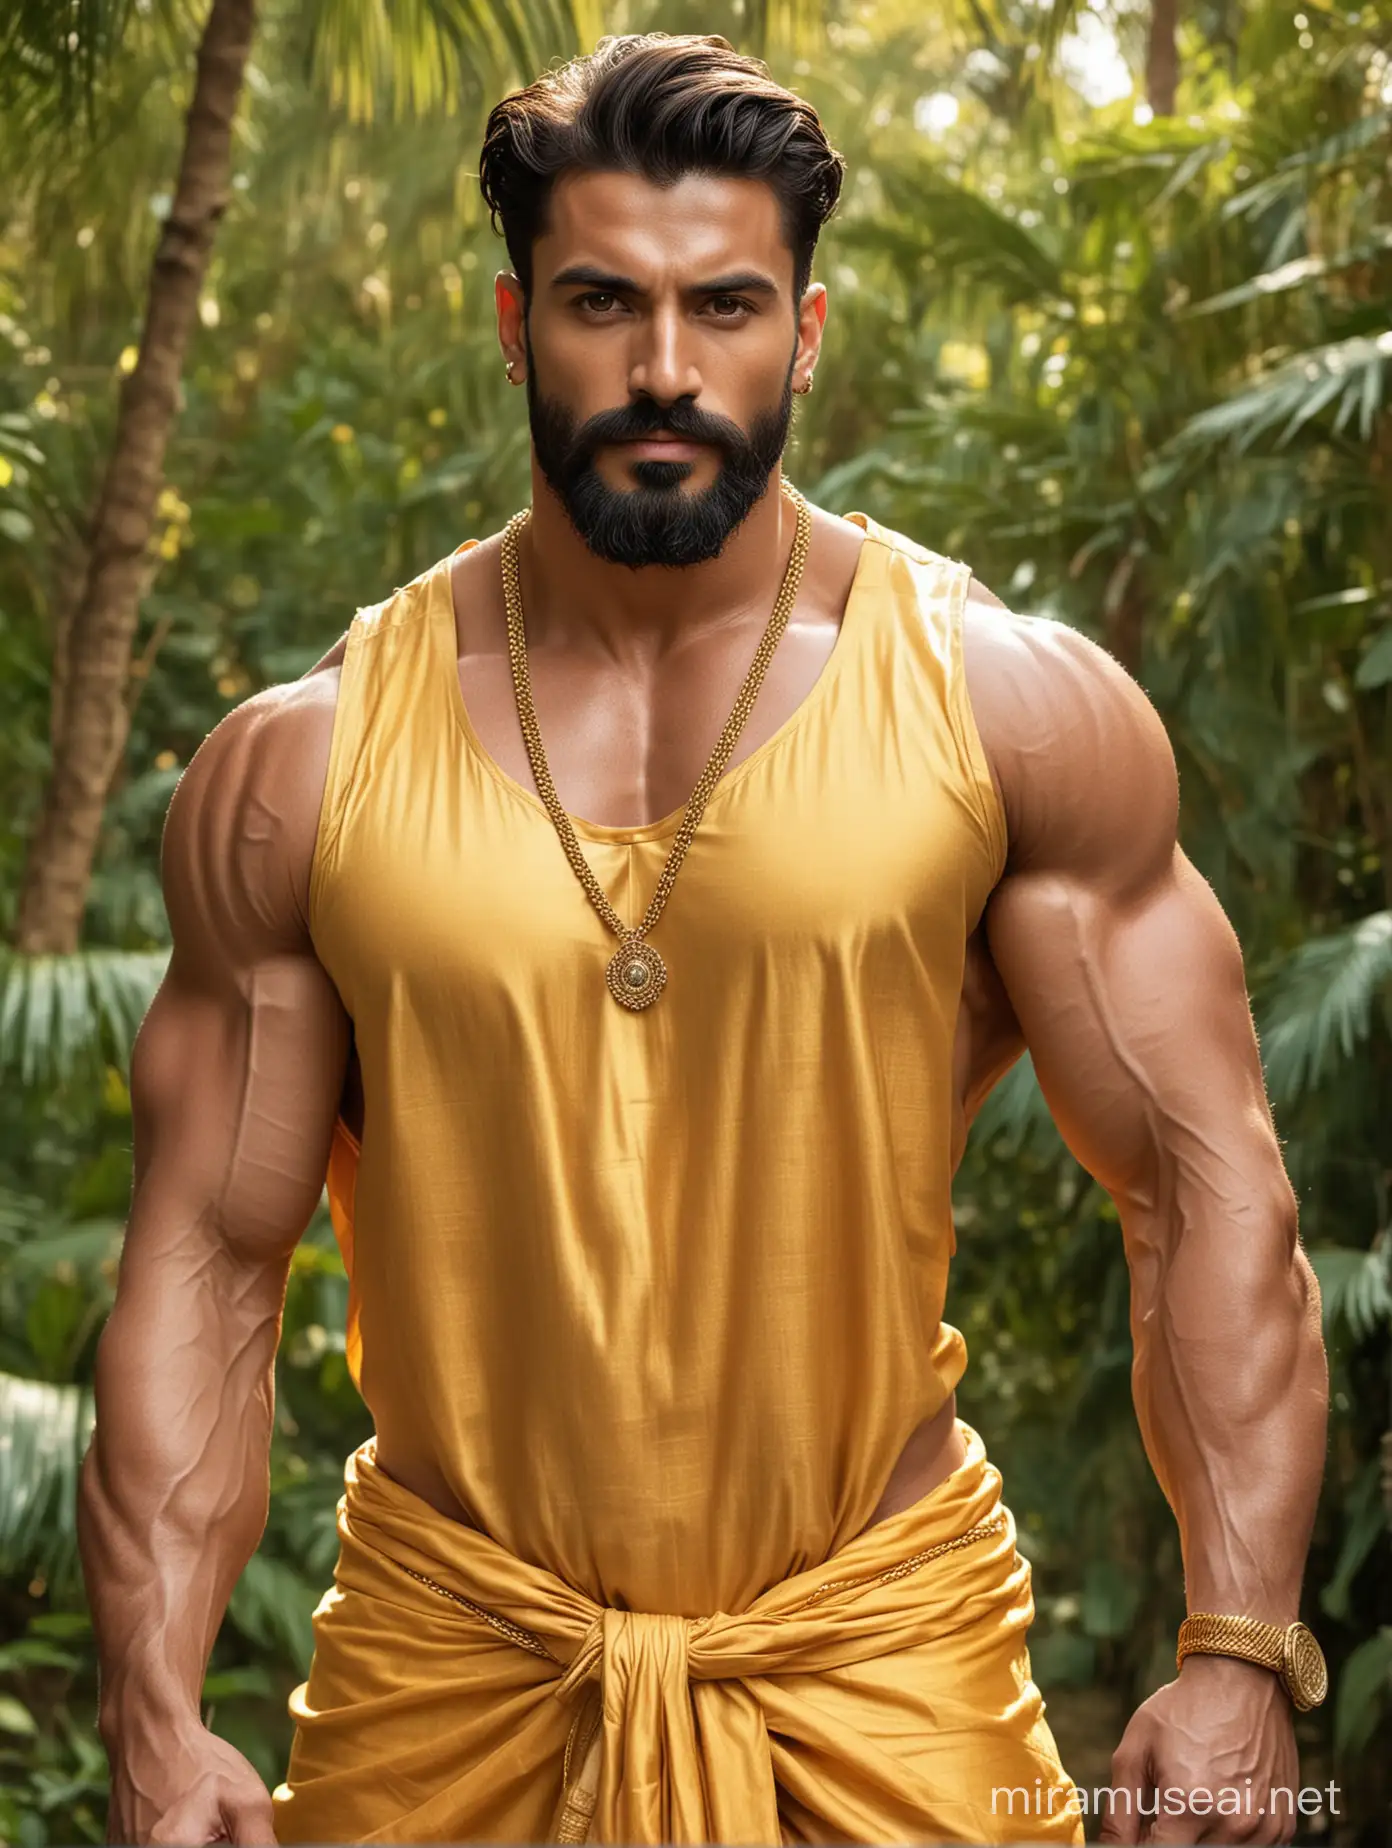 Majestic Bodybuilder King Displaying Power in Golden Attire Amidst Jungle